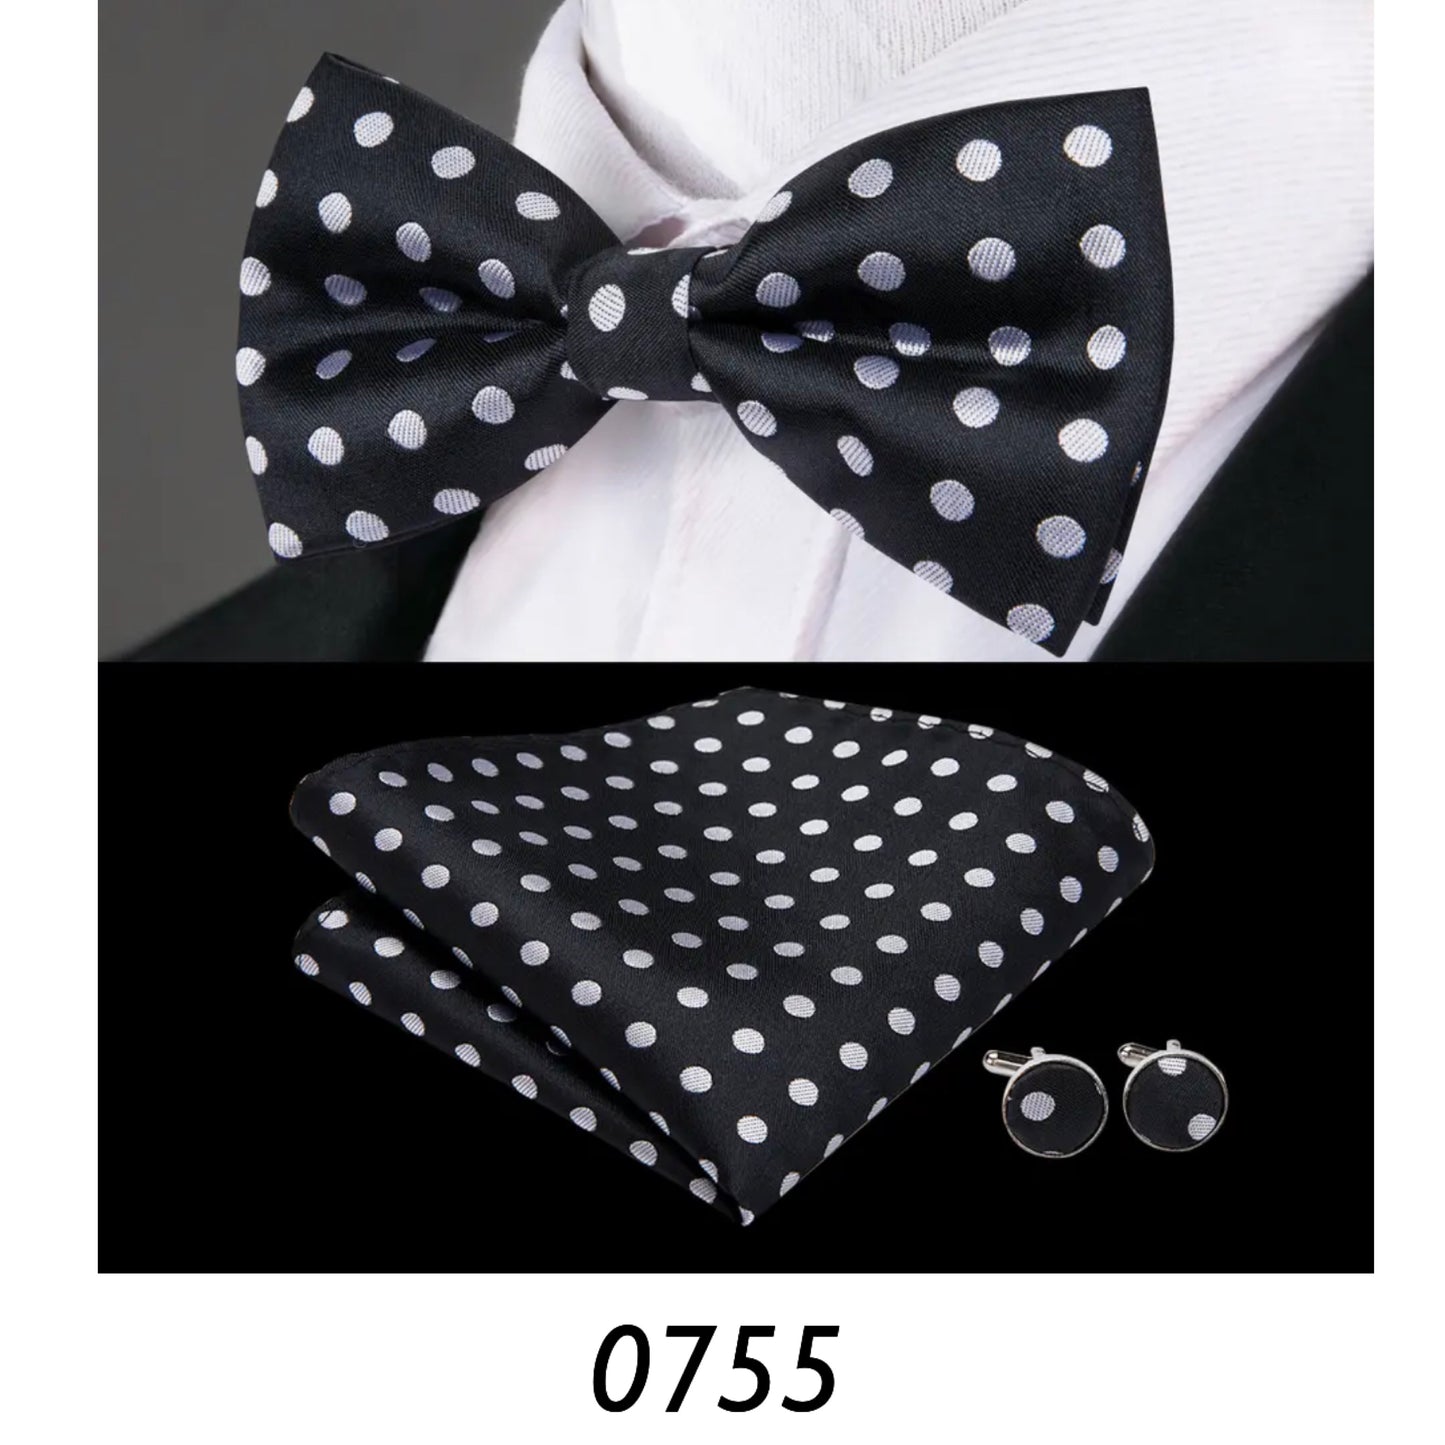 Men’s Silk Coordinated Black Bow Tie Set - Black with White Polka Dots 0755